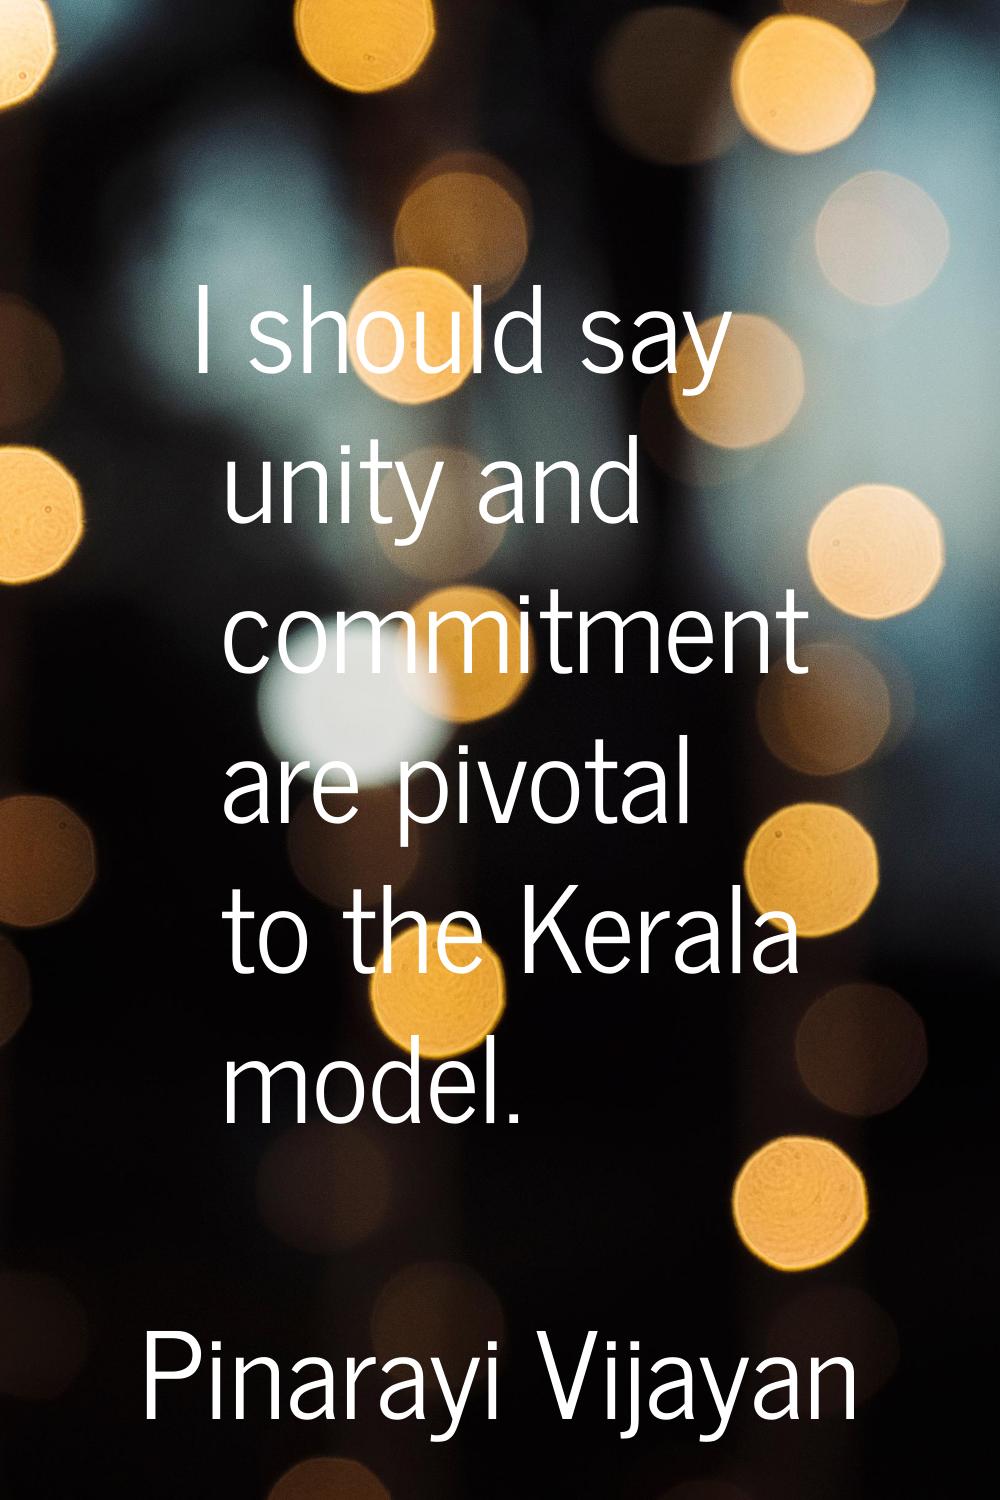 I should say unity and commitment are pivotal to the Kerala model.